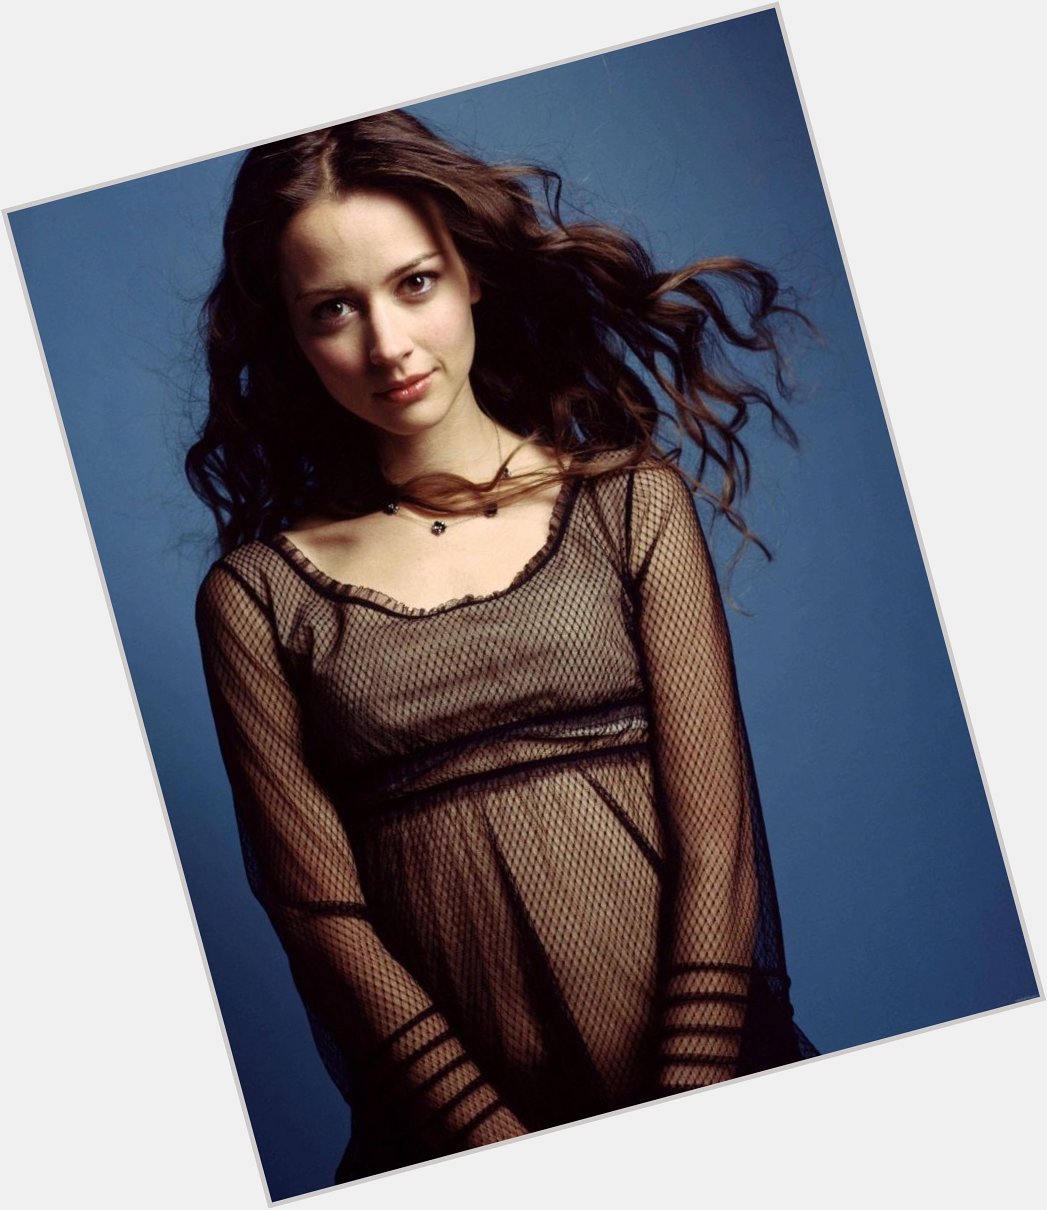 Happy Birthday to Amy Acker who turns 43 today! 